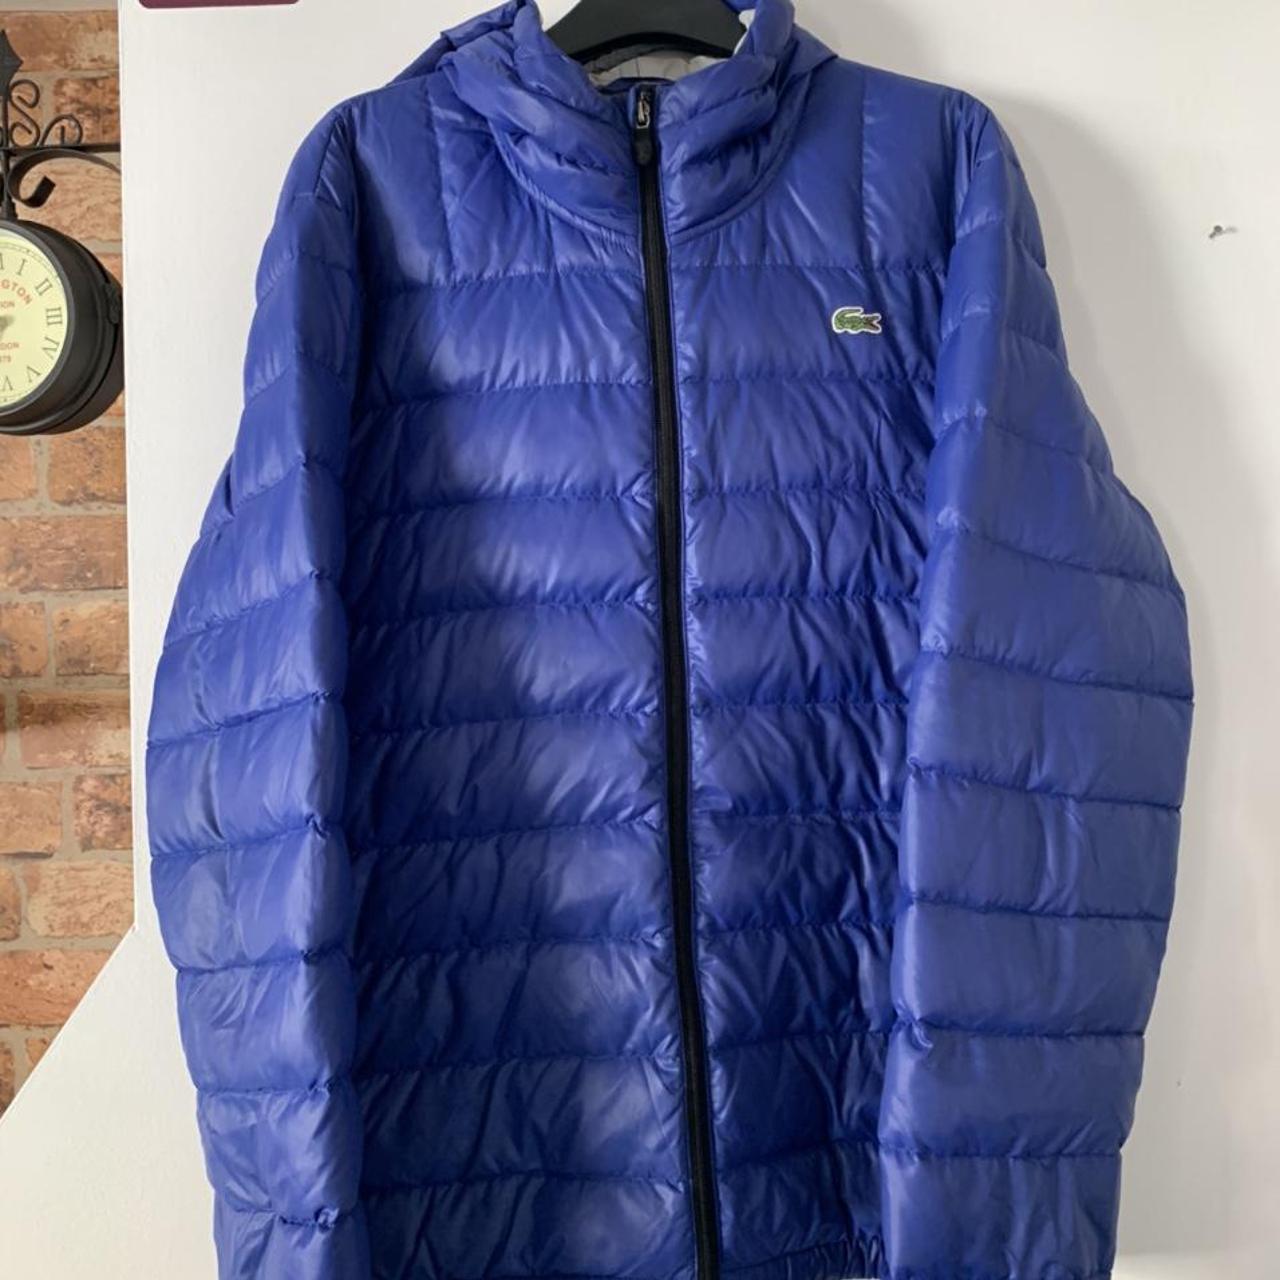 Lacoste puffer jacket. Great blue colour and still... - Depop